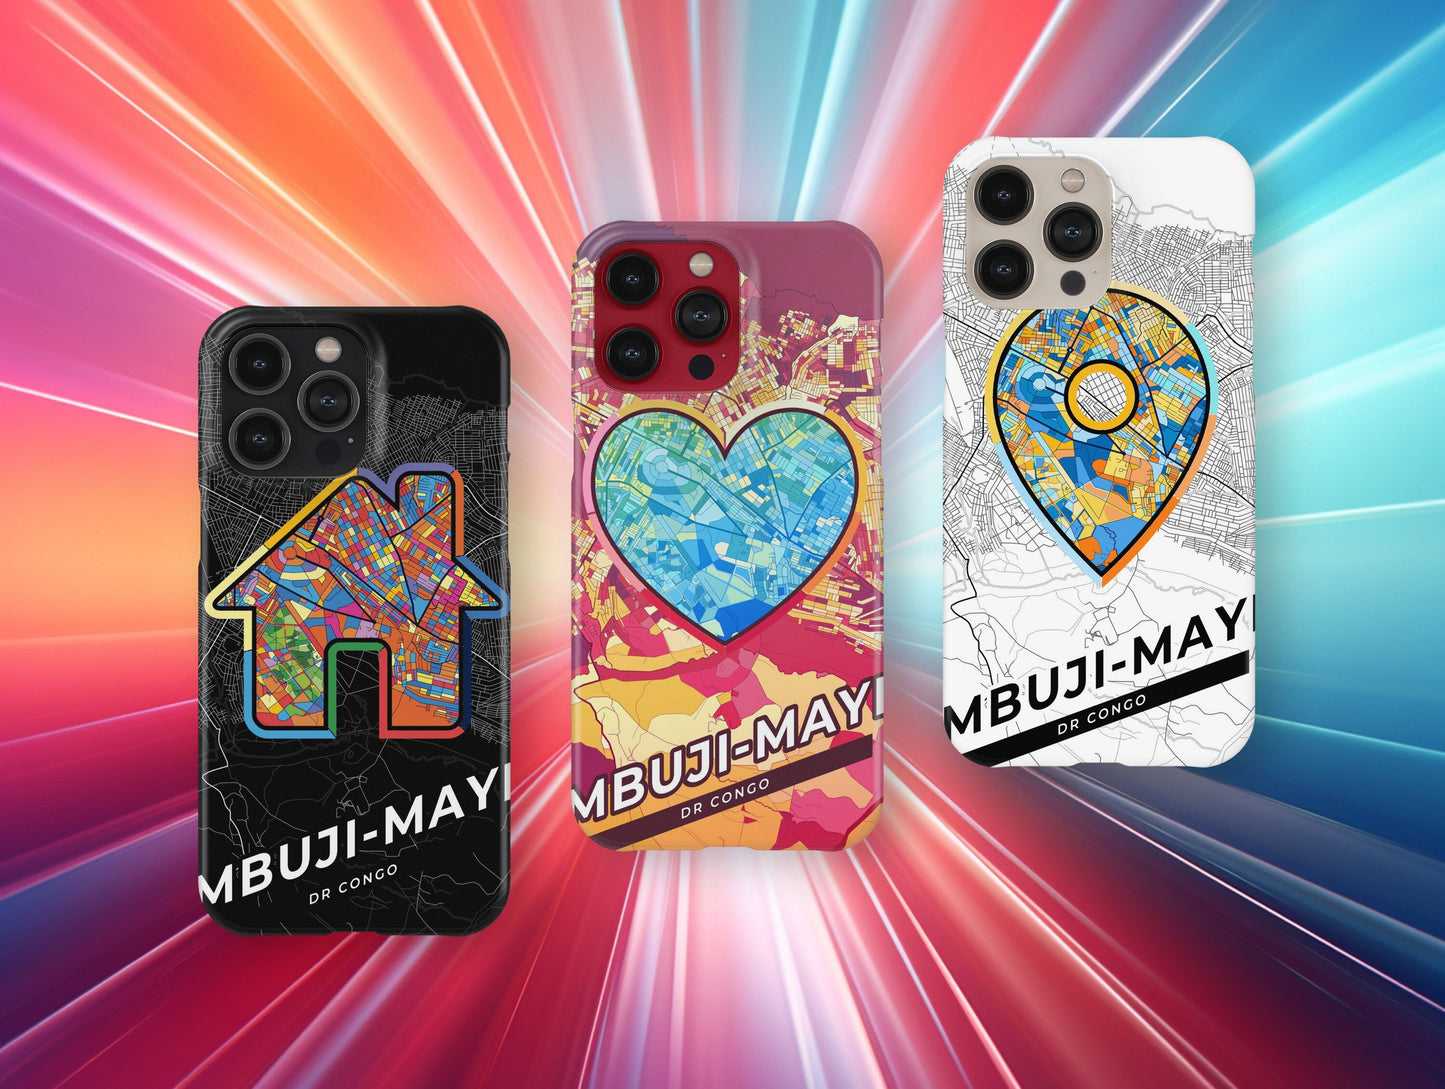 Mbuji-Mayi Dr Congo slim phone case with colorful icon. Birthday, wedding or housewarming gift. Couple match cases.